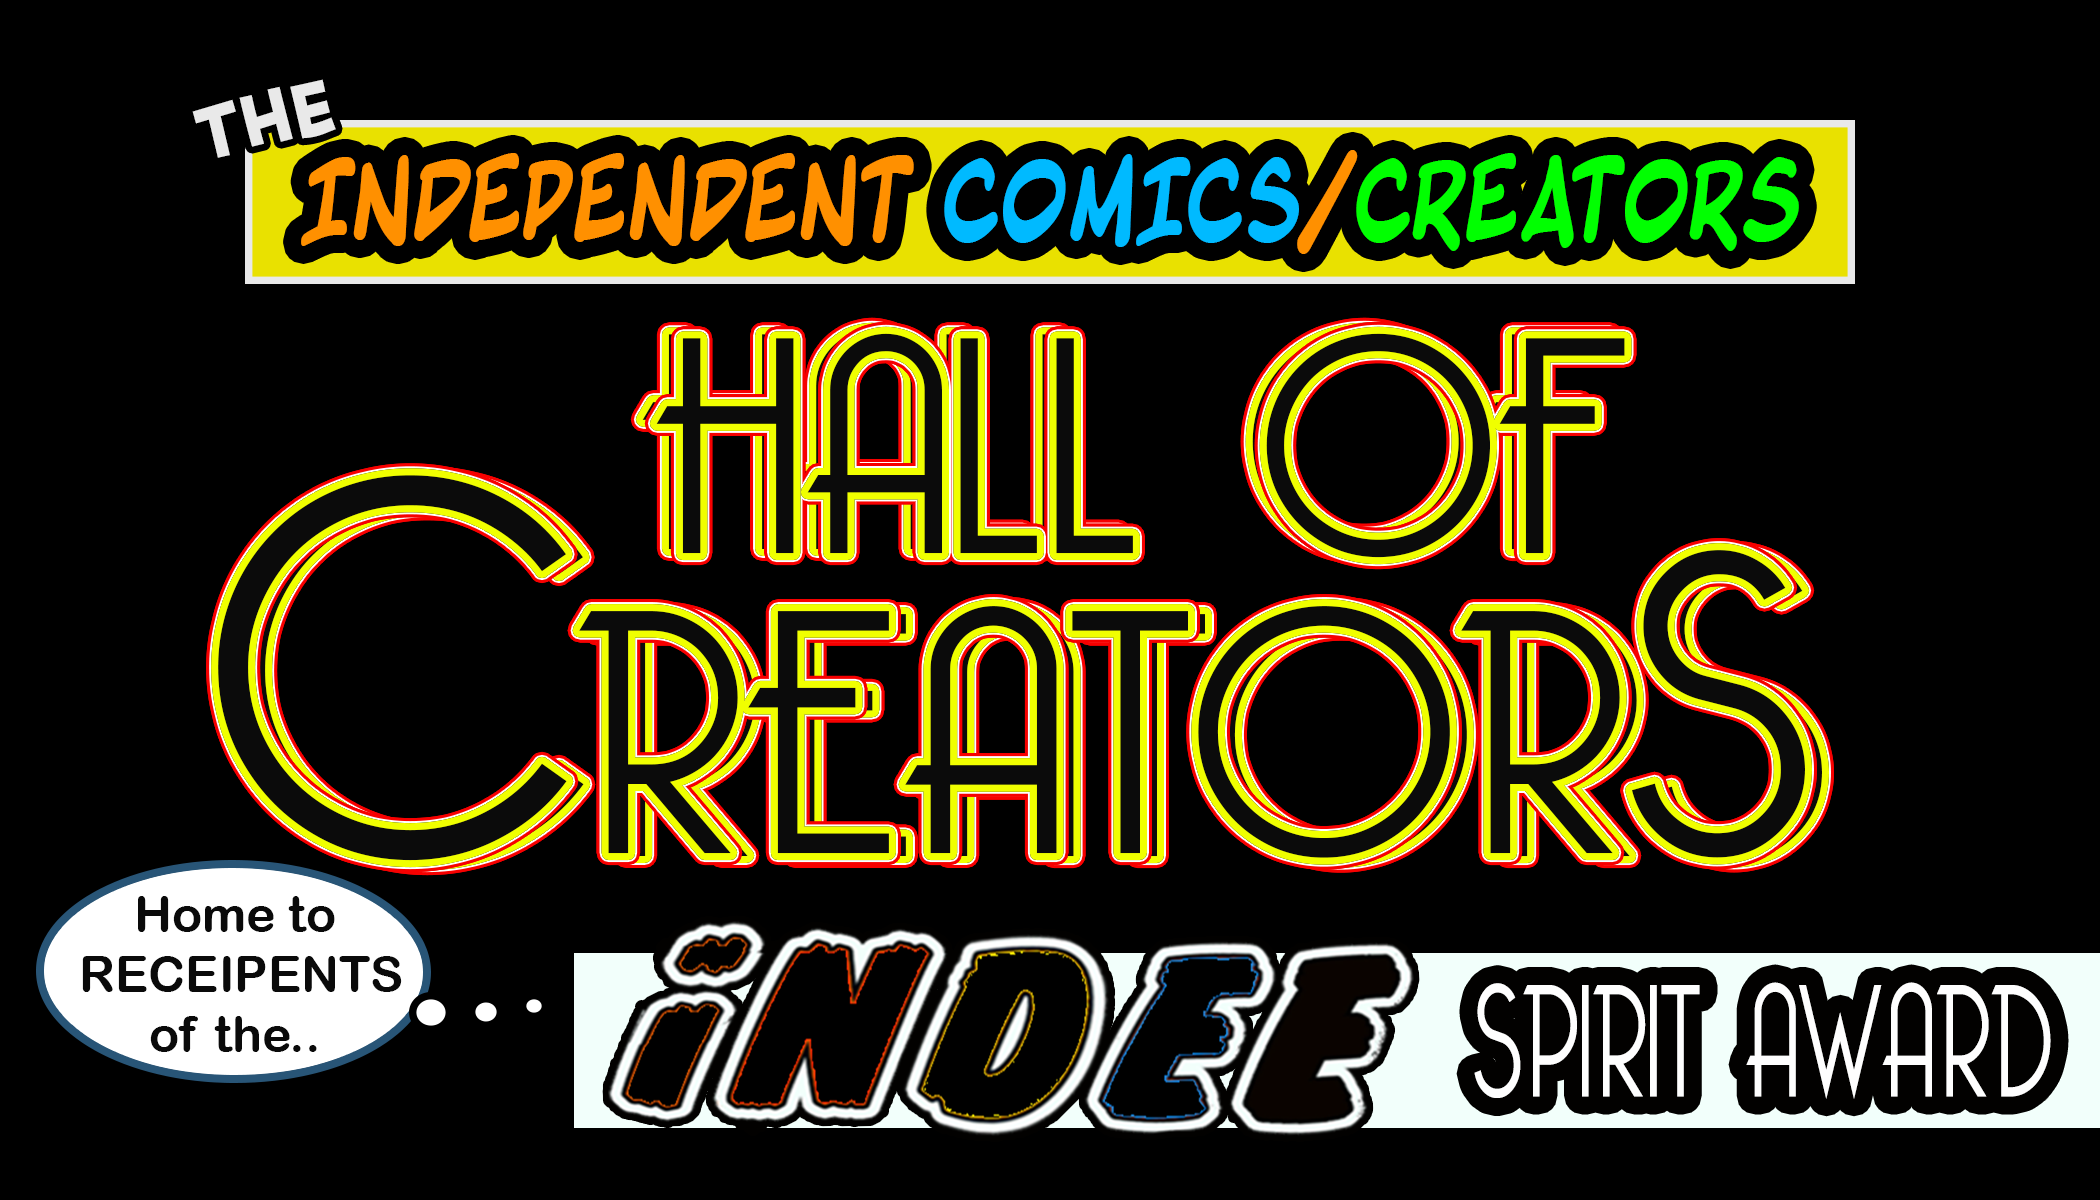 Brian Pulido and Keith Thomas enter The INDEPENDENT COMICS HALL OF CREATORS  and Receive SPIRIT AWARDS